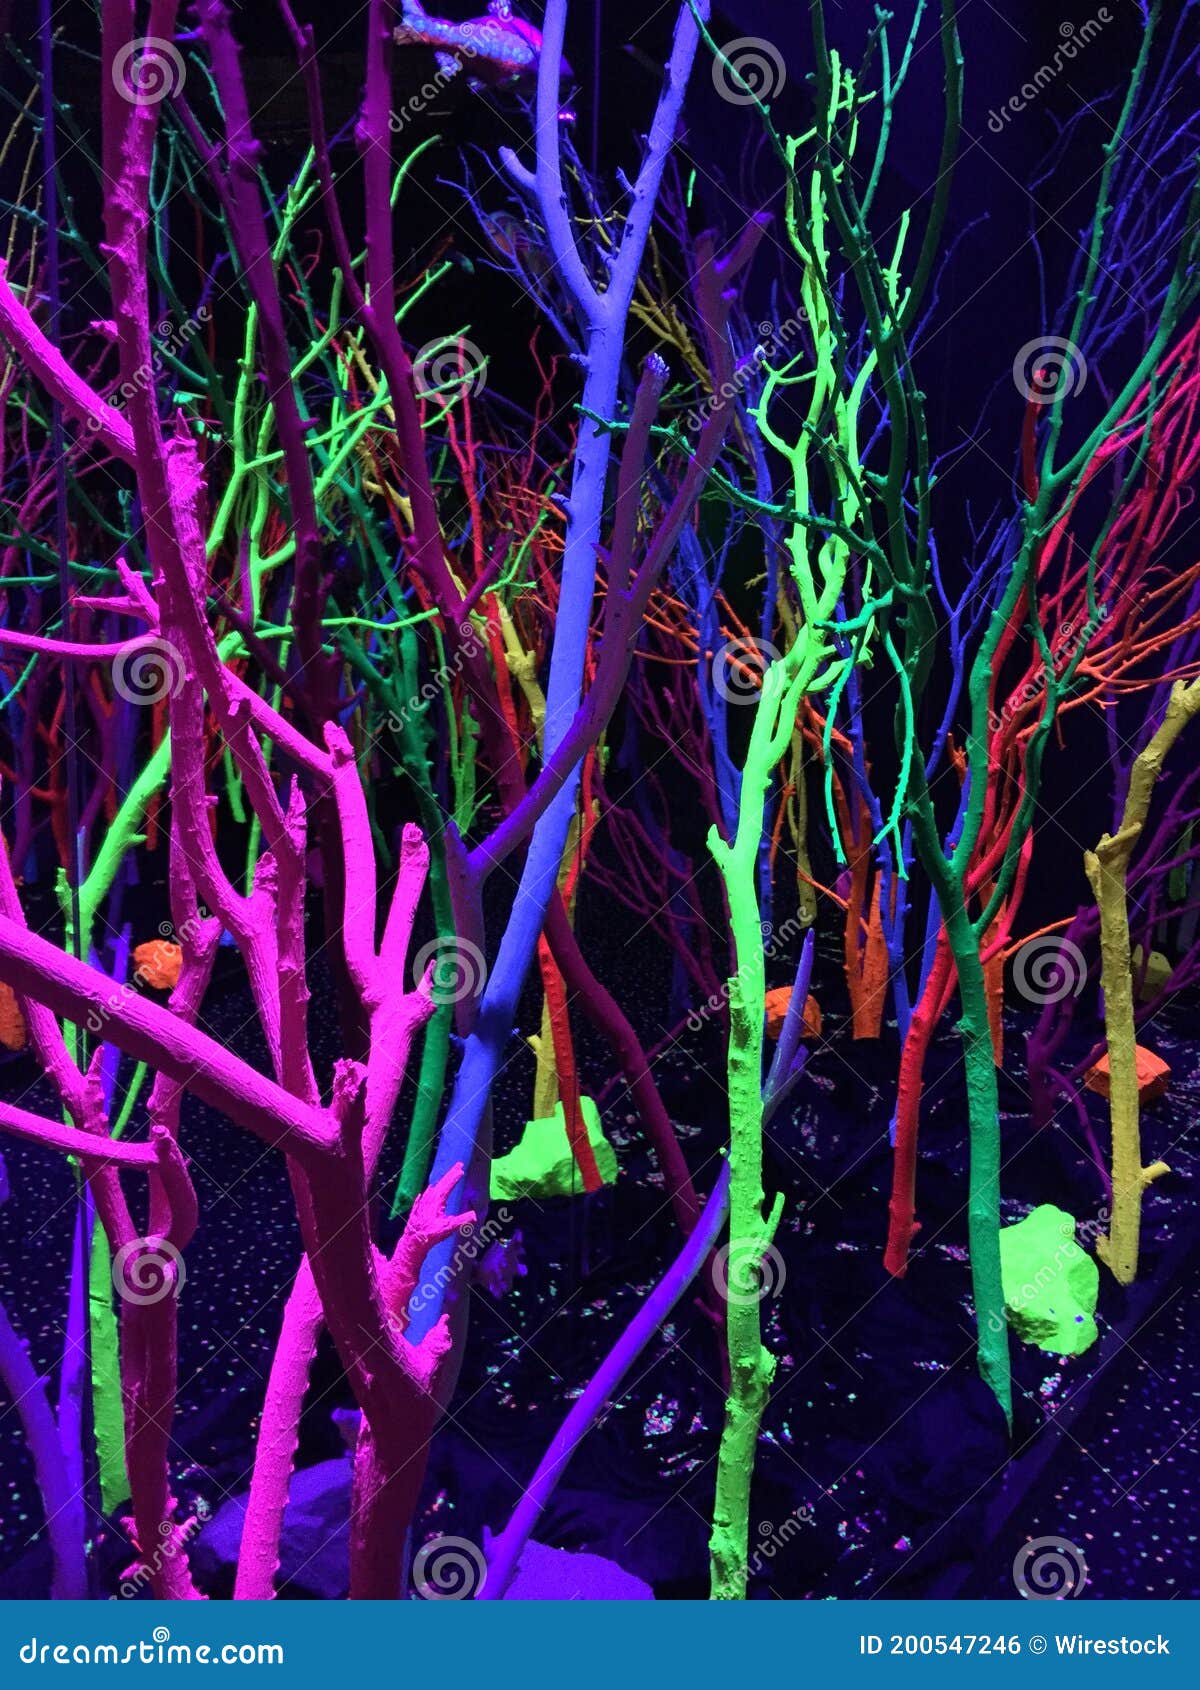 Closeup of Neon Decorations on the Trees, Immersive Art Stock